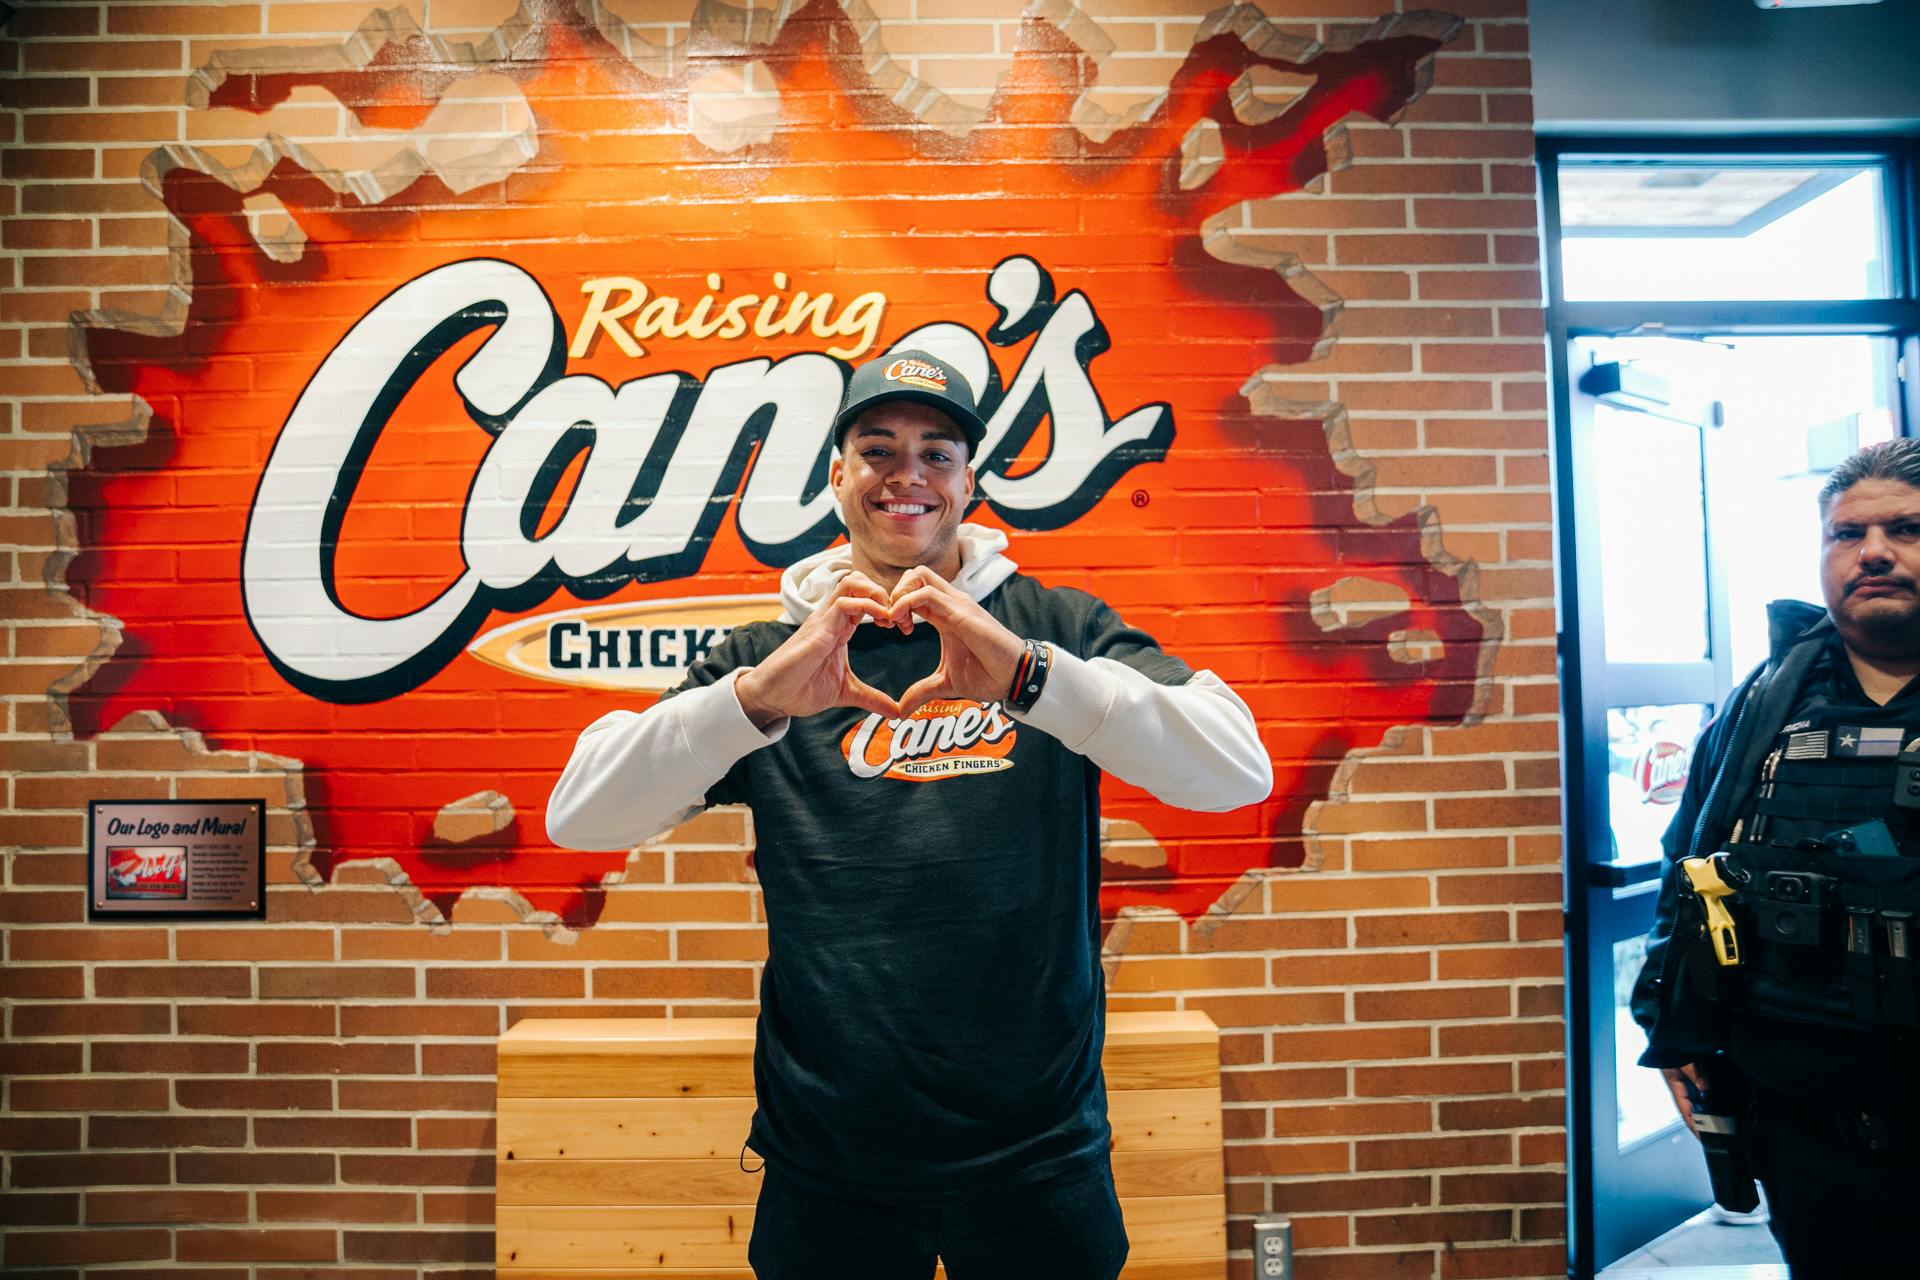 Jeremy Pena showing One Love at Raising Cane's 